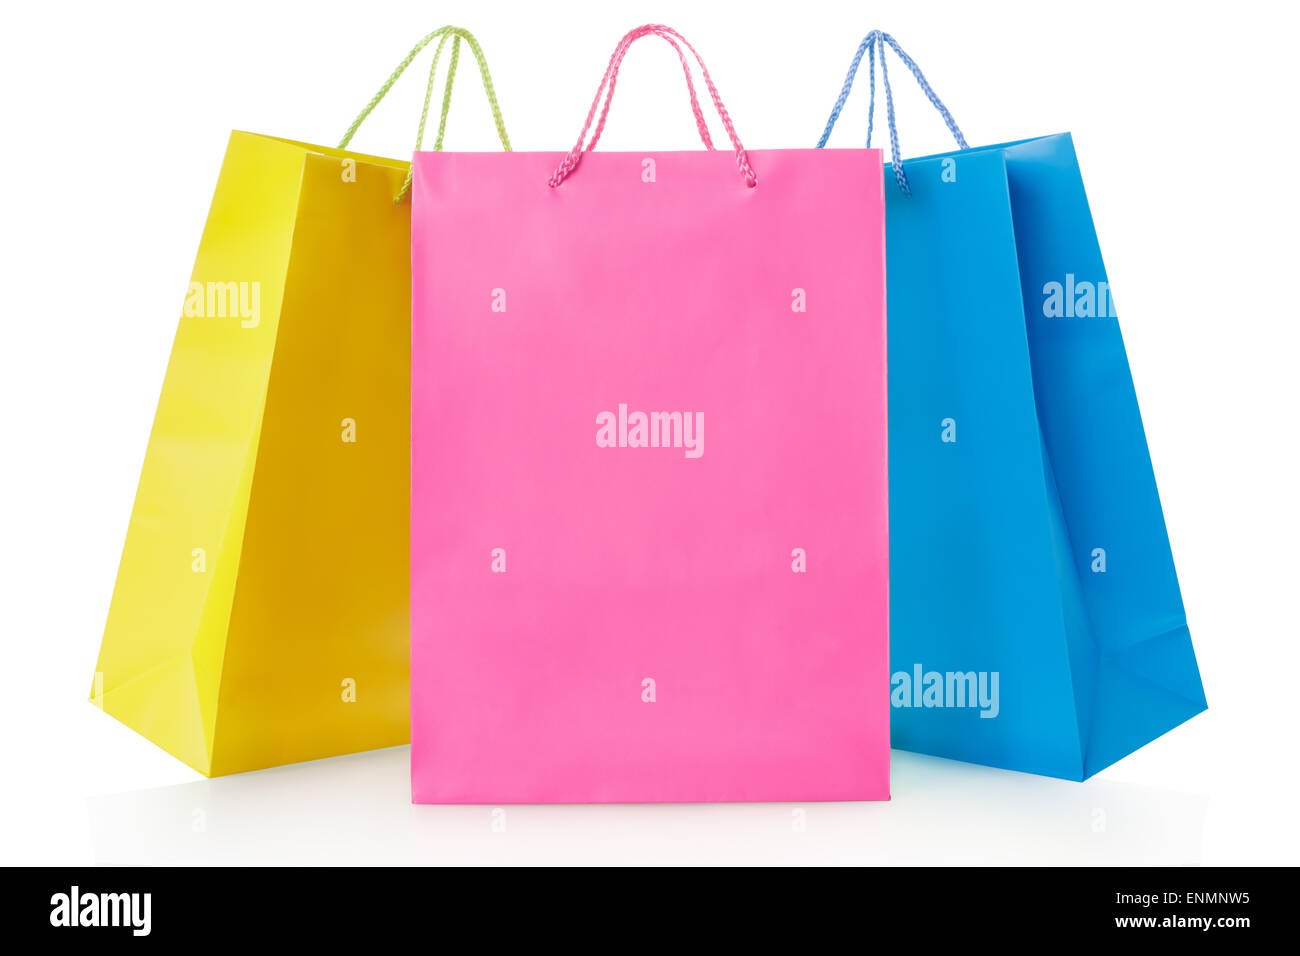 Colorful shopping bags in paper in yellow, pink and blue colors Stock Photo